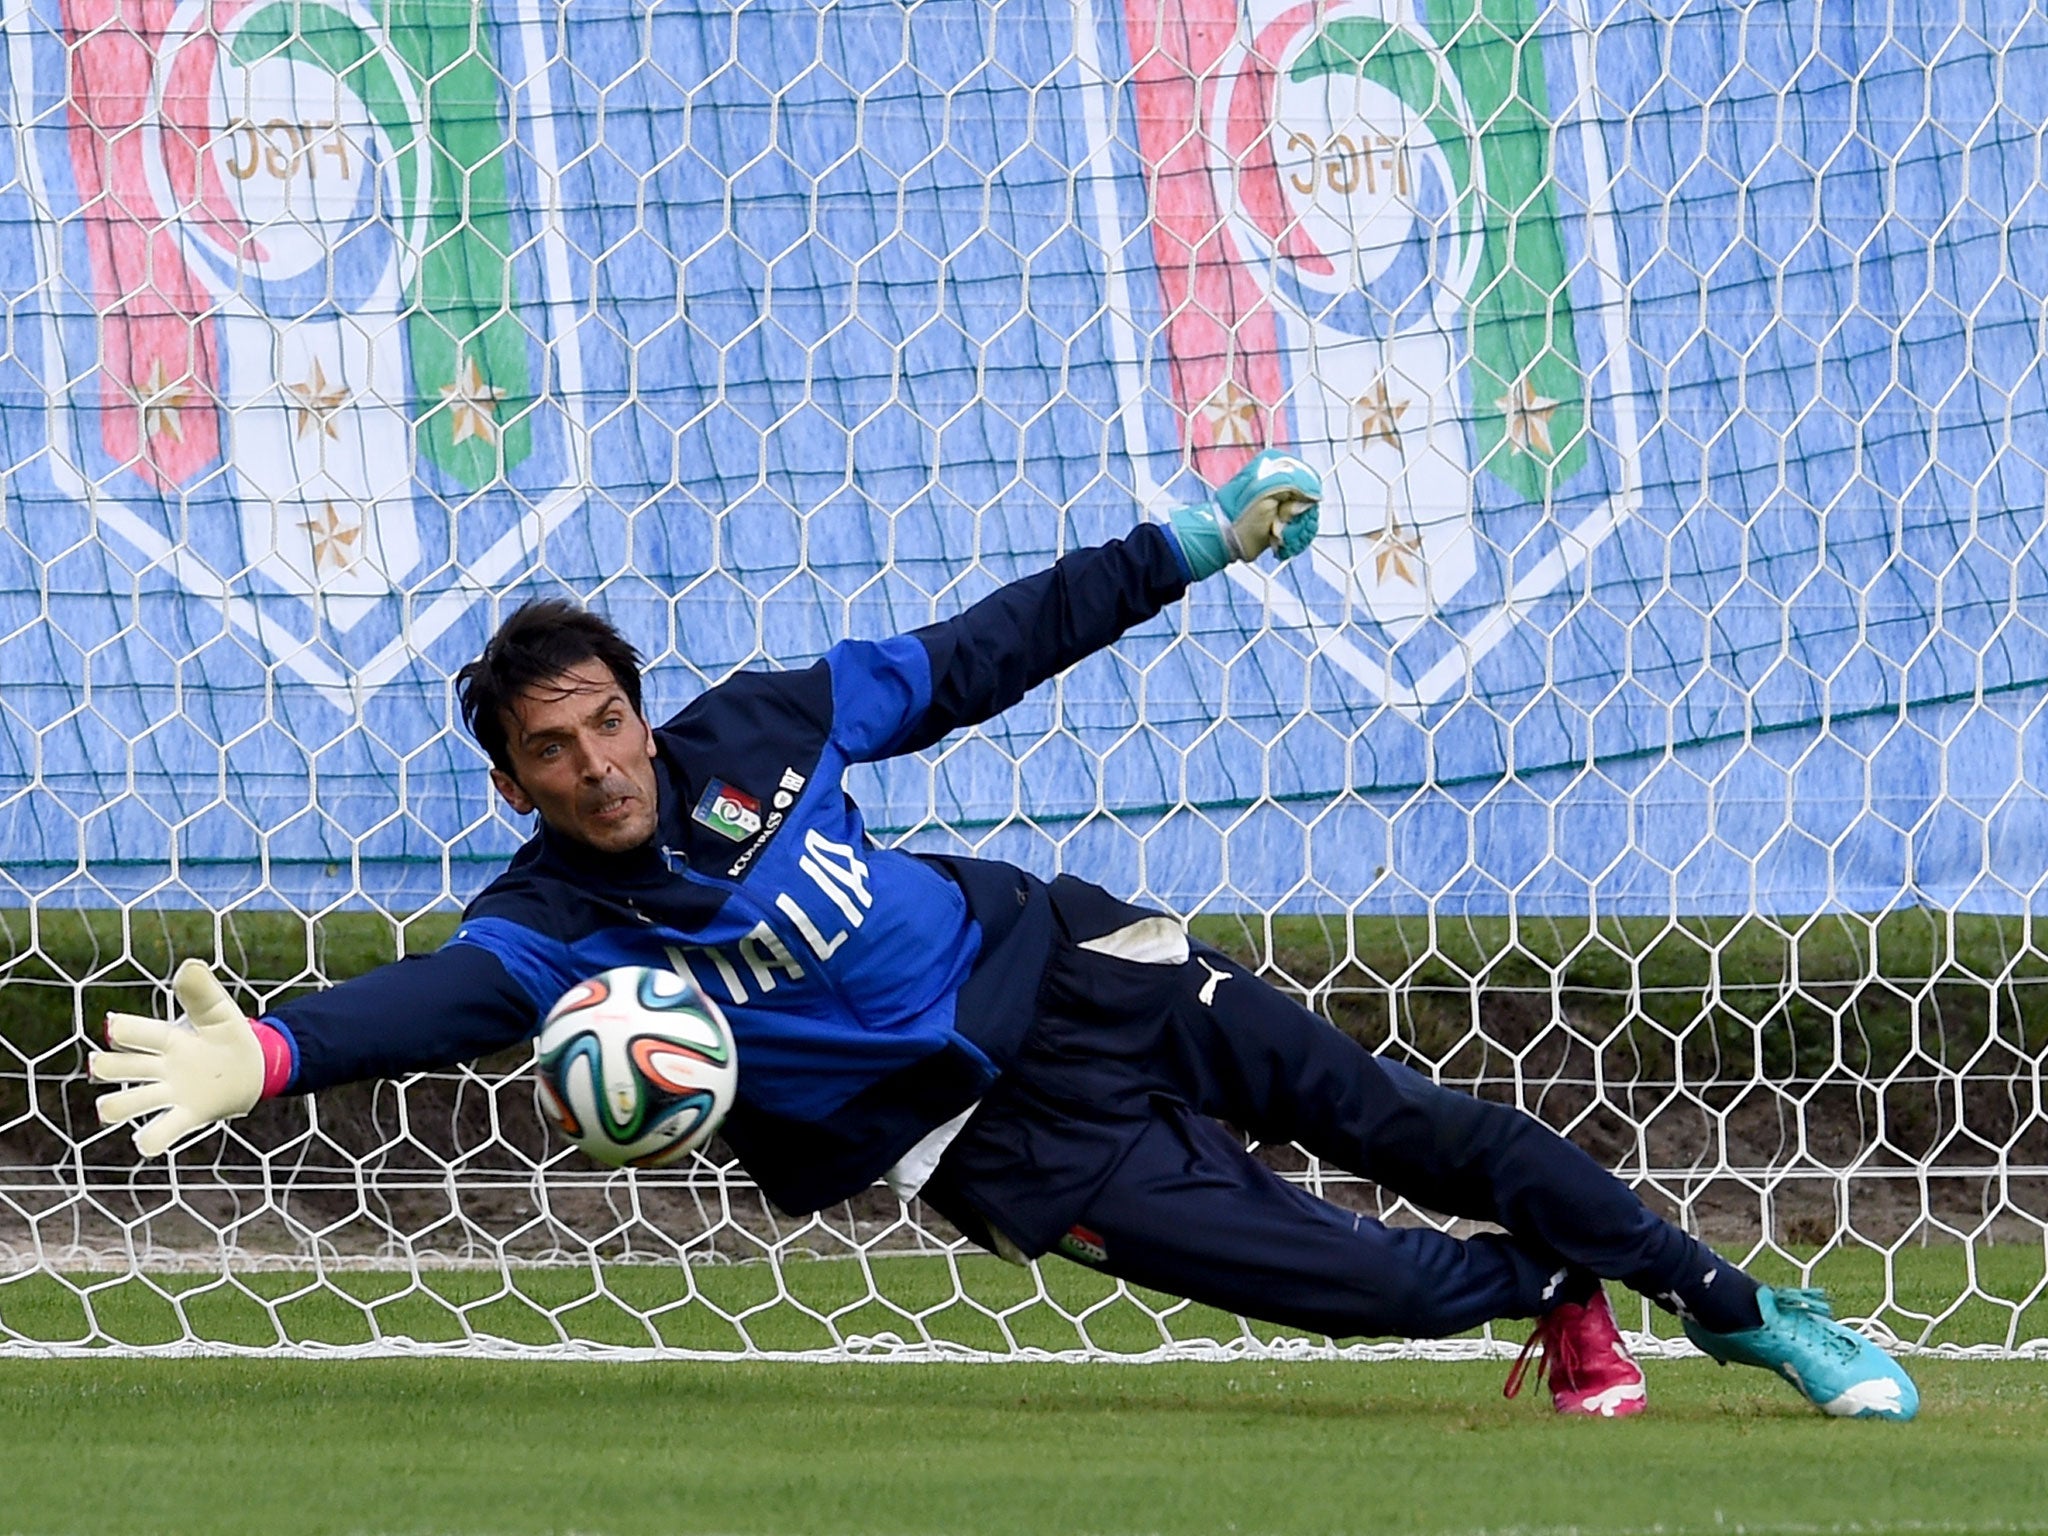 Italy keeper Gianluigi Buffon is expected to return against Costa Rica